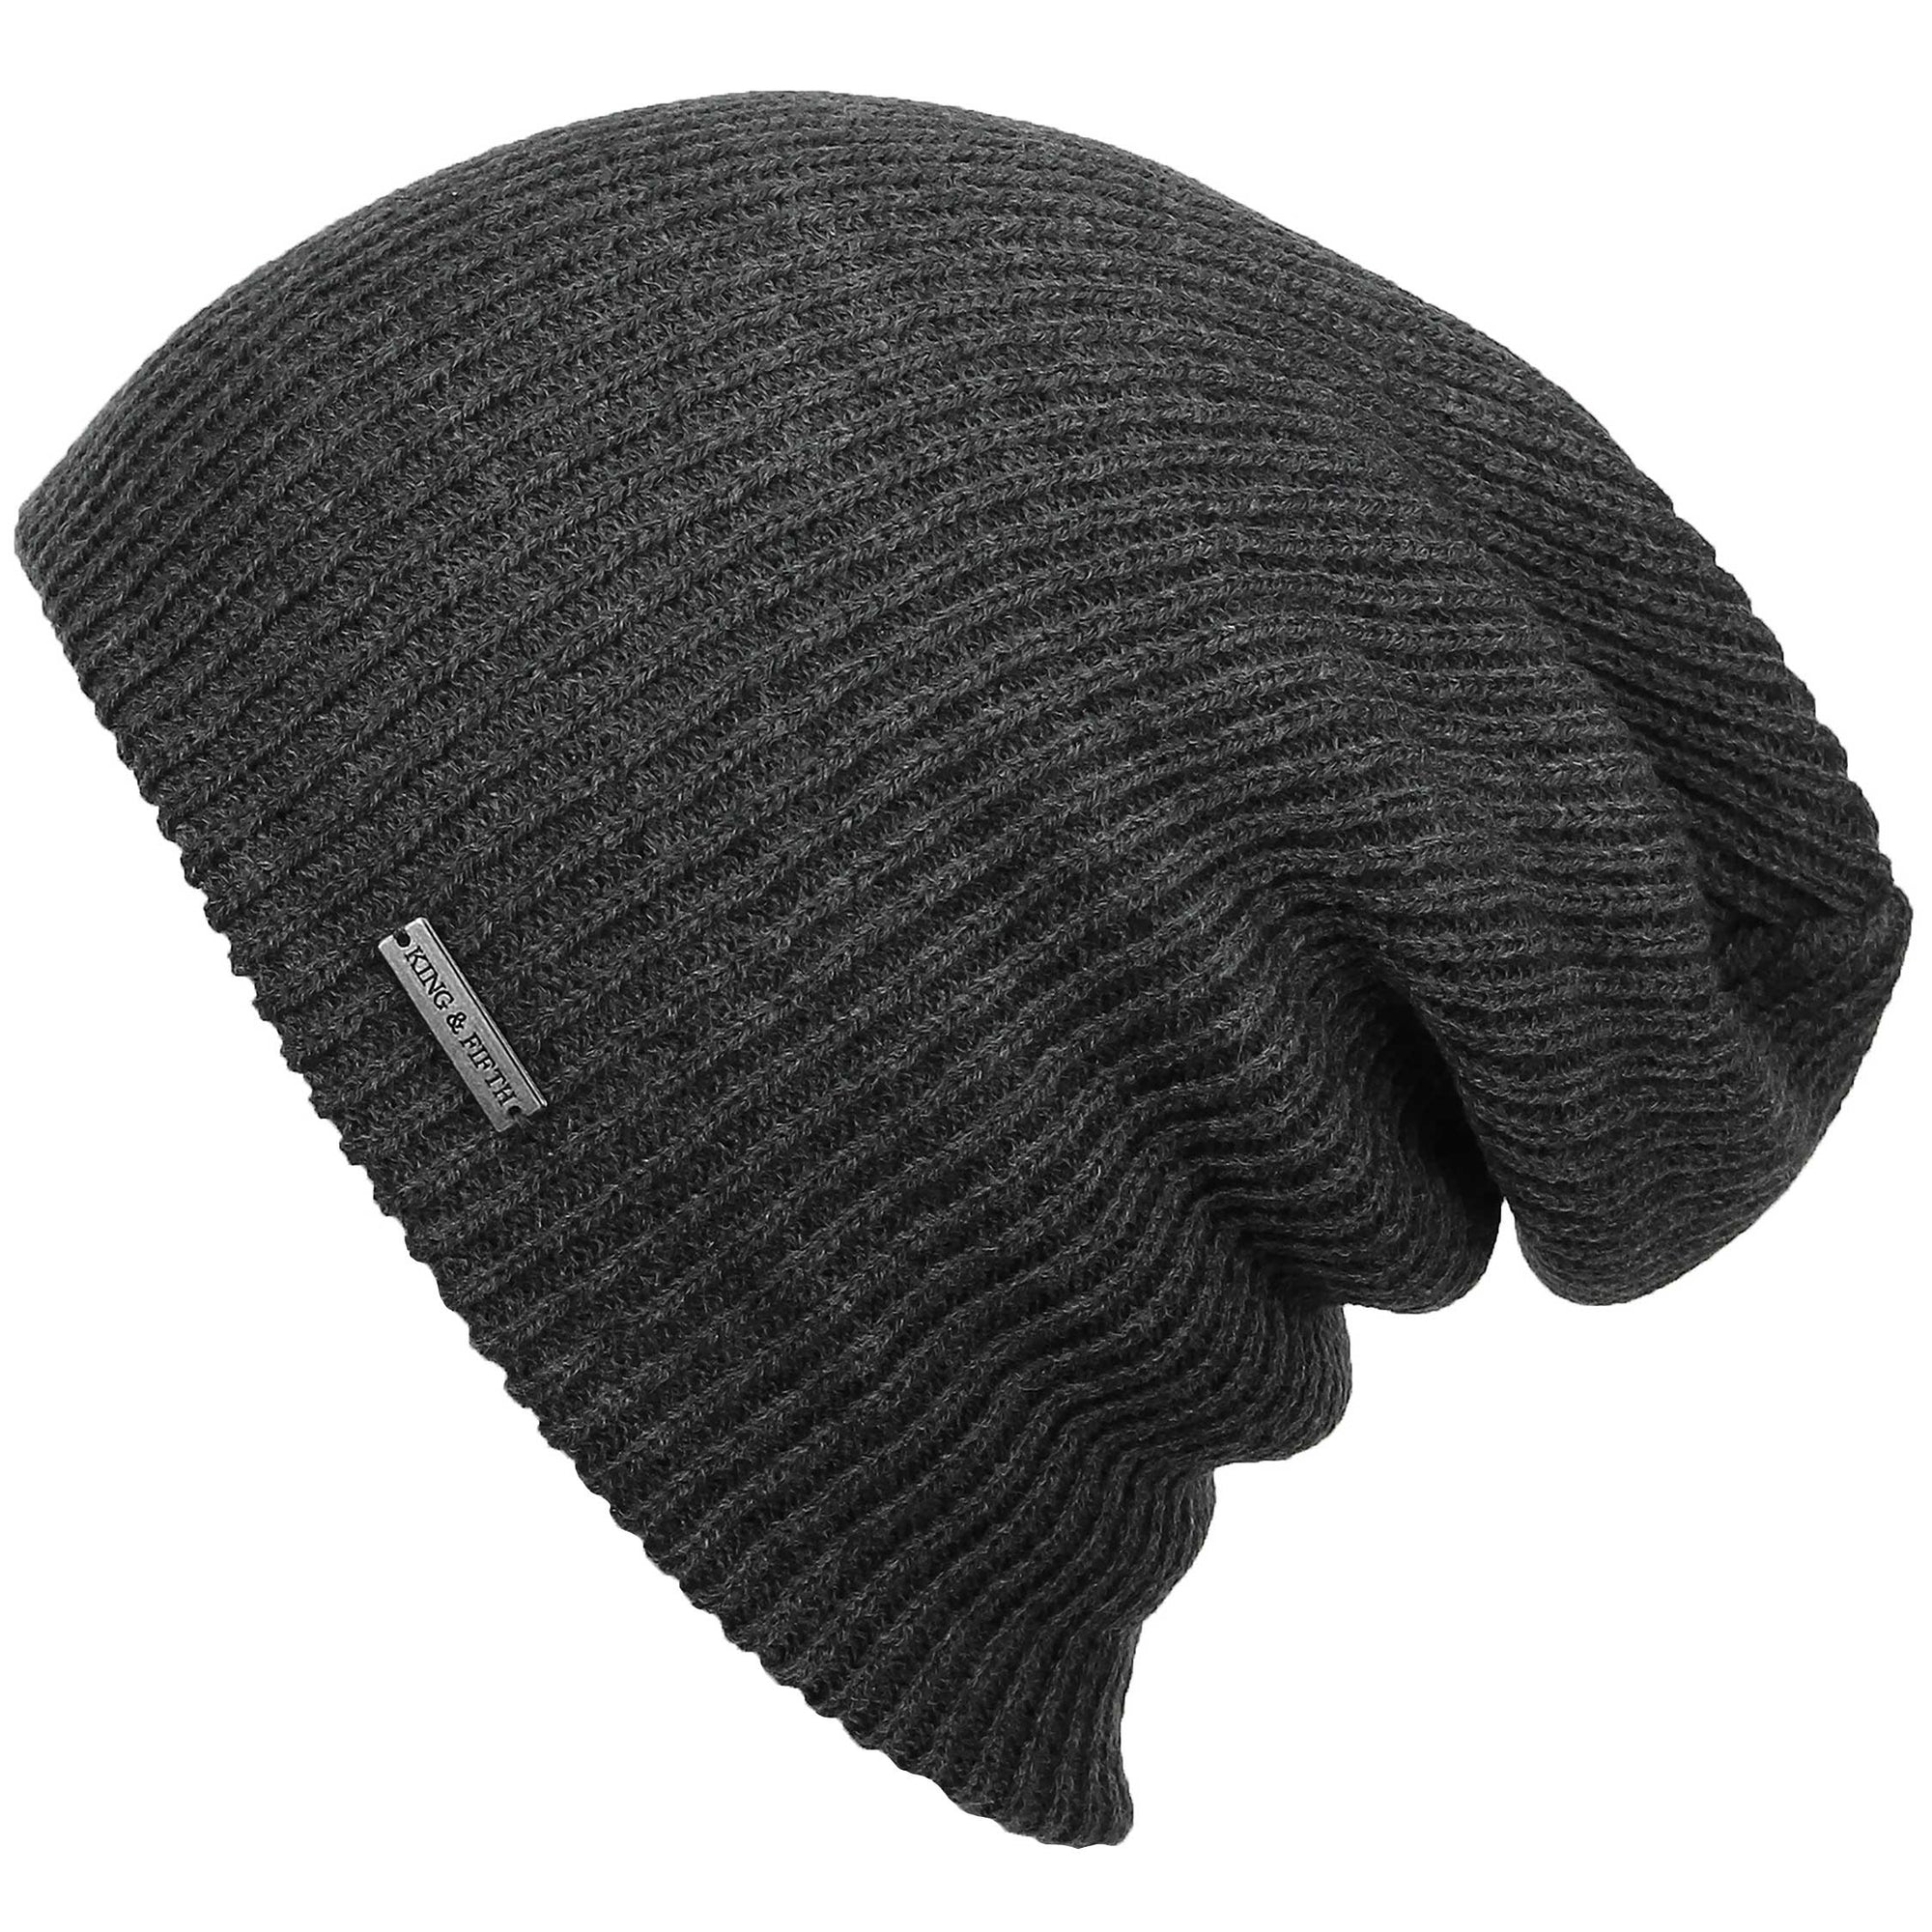 forms shot of a black knitted slouchy beanie with a metal label that says "king & fifth"